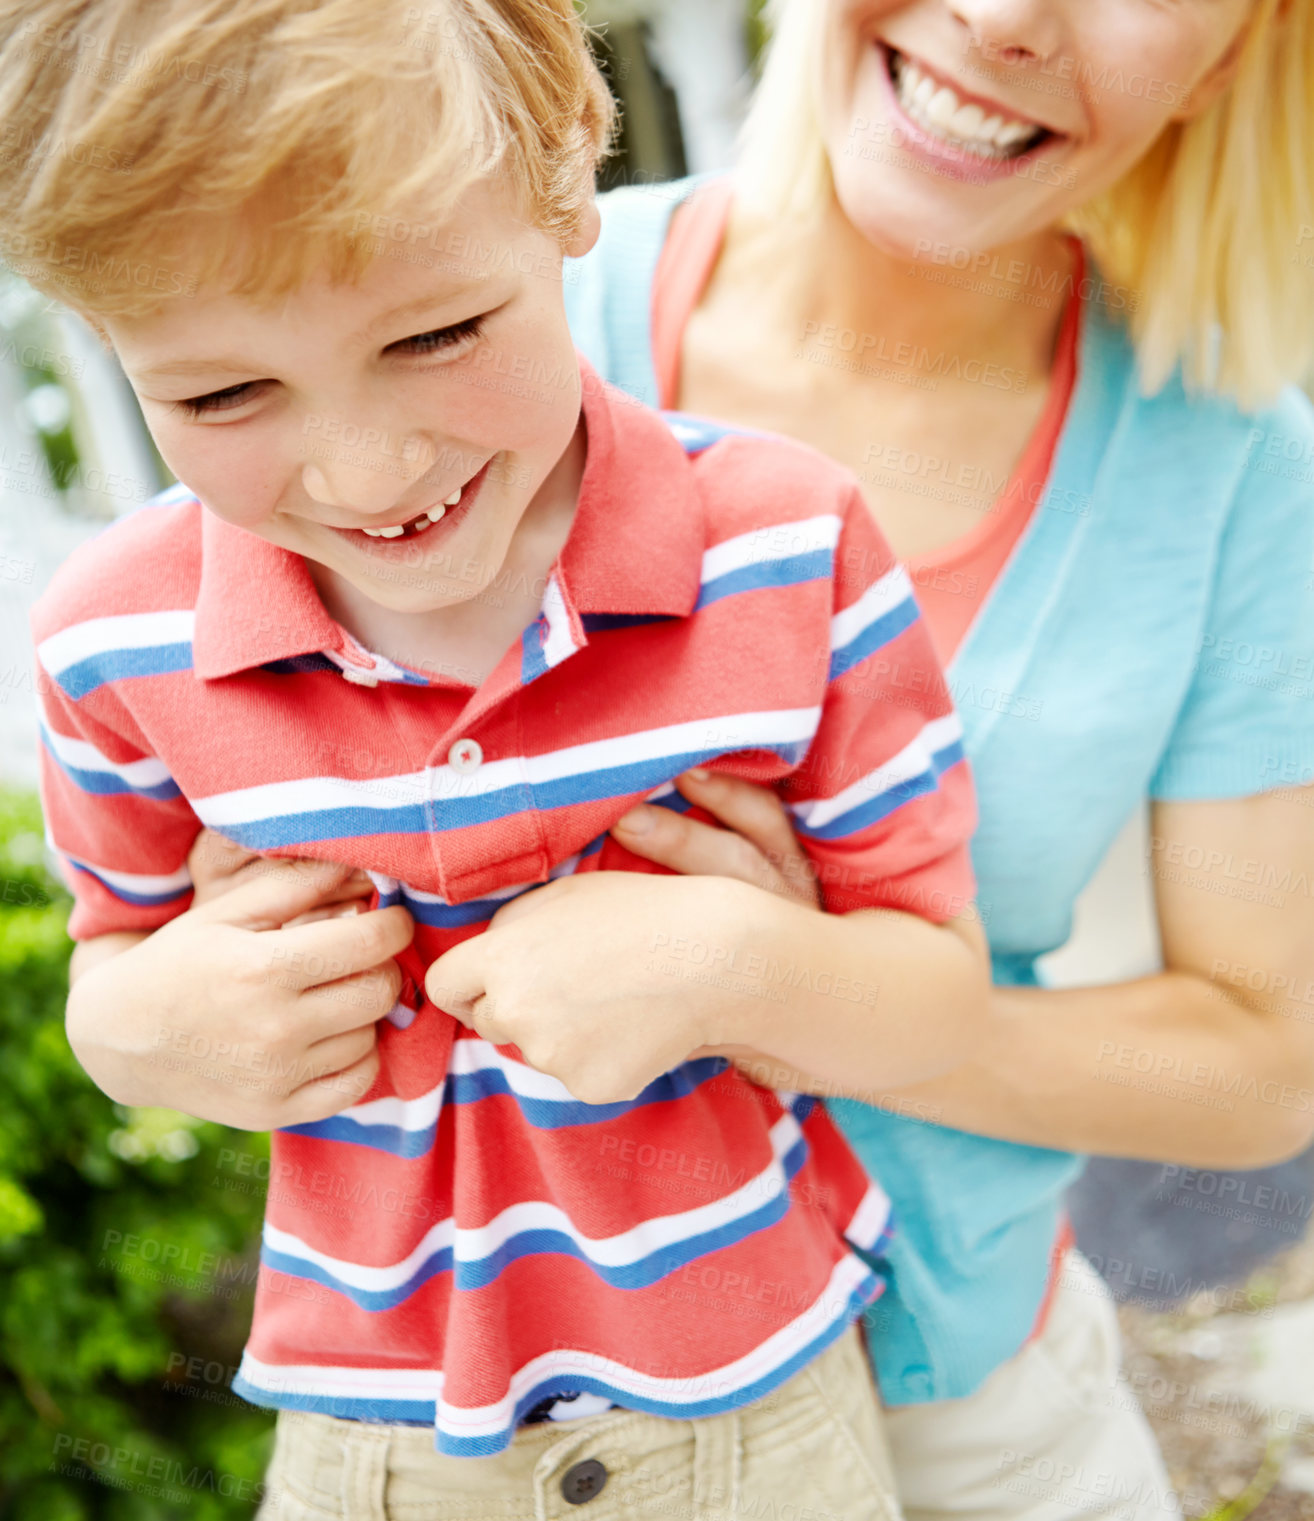 Buy stock photo Cute little boy spending time with his mom